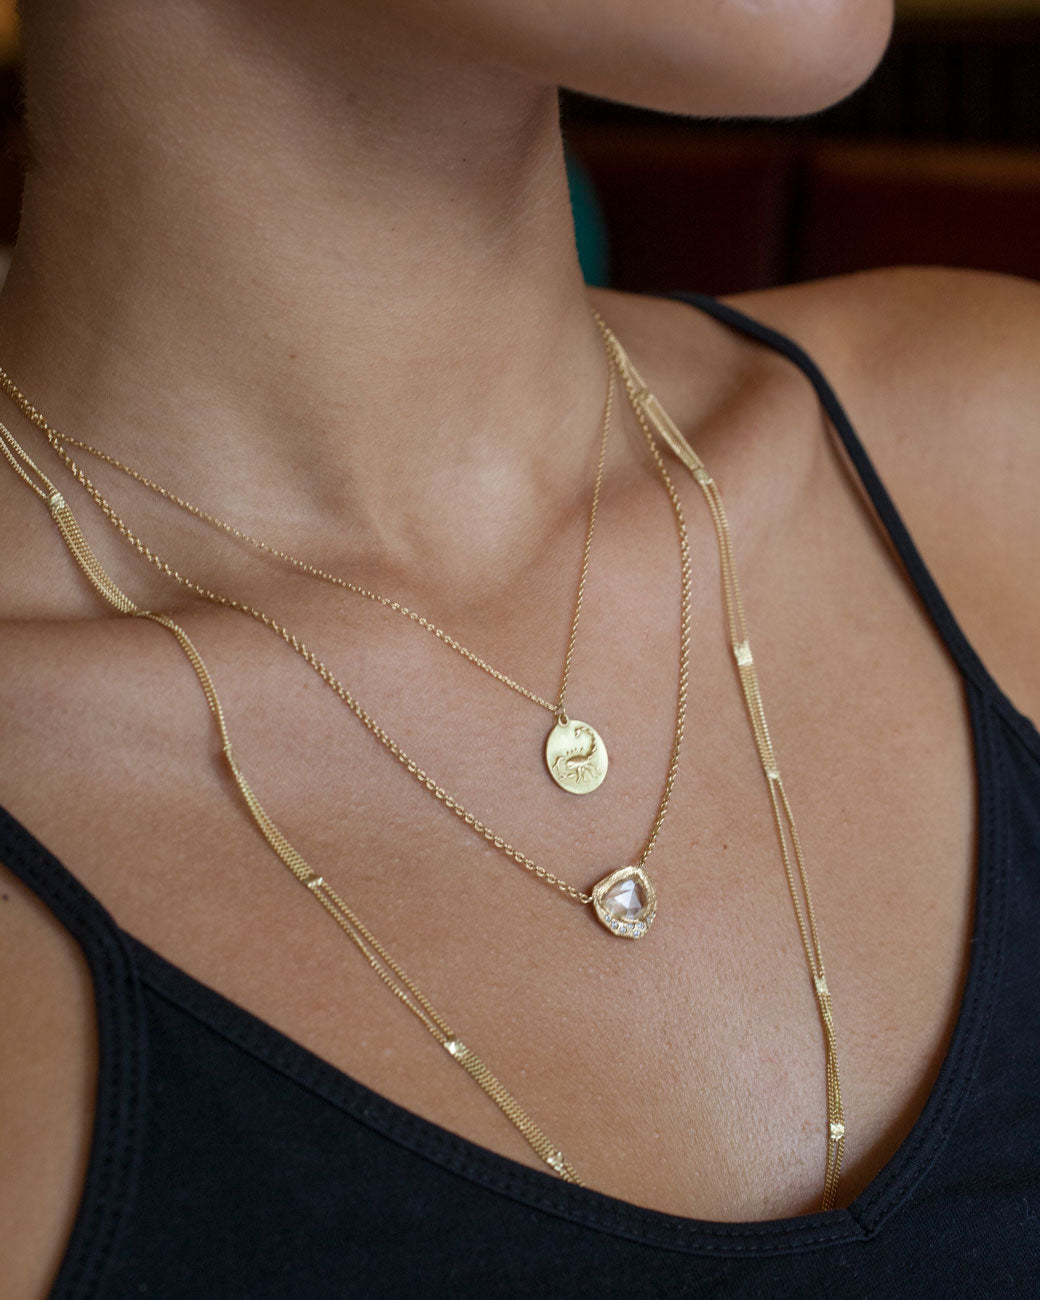 A woman wears three necklaces; one is a gold disc pendant with a Scorpio zodiac design, one is a large white sapphire, and the other is a long multi-chain gold piece. She wears a black dress.